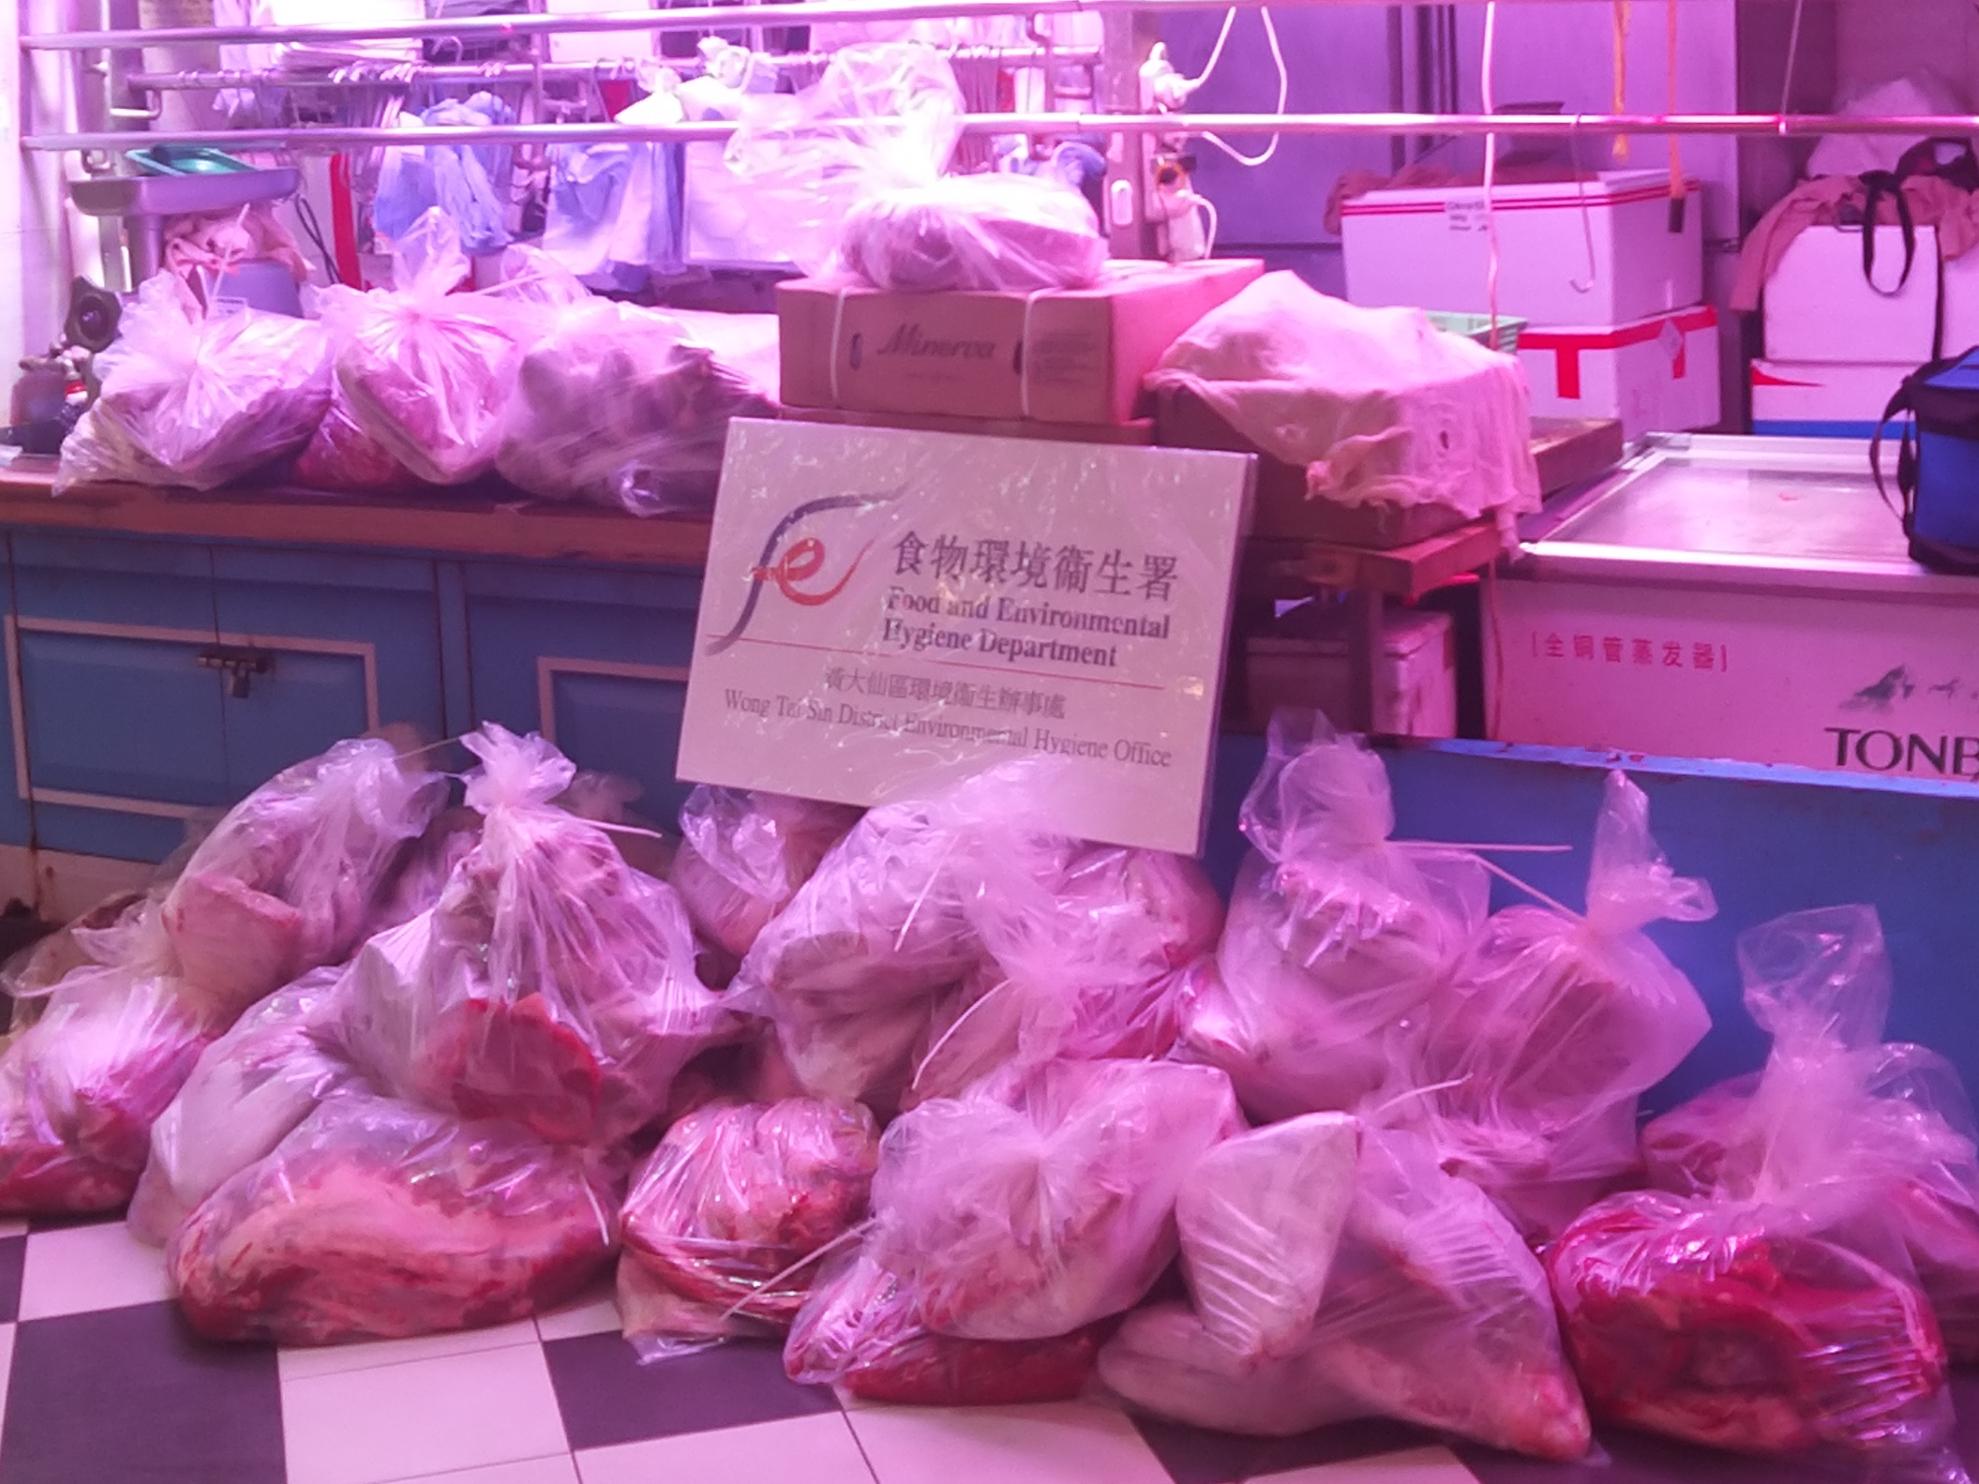 The Food and Environmental Hygiene Department (FEHD) raided two licensed fresh provision shops in Wong Tai Sin District and Tuen Mun District suspected of selling frozen meat as fresh meat today (January 26). Photo shows some of the meat seized by FEHD officers during the operation in Wong Tai Sin District.